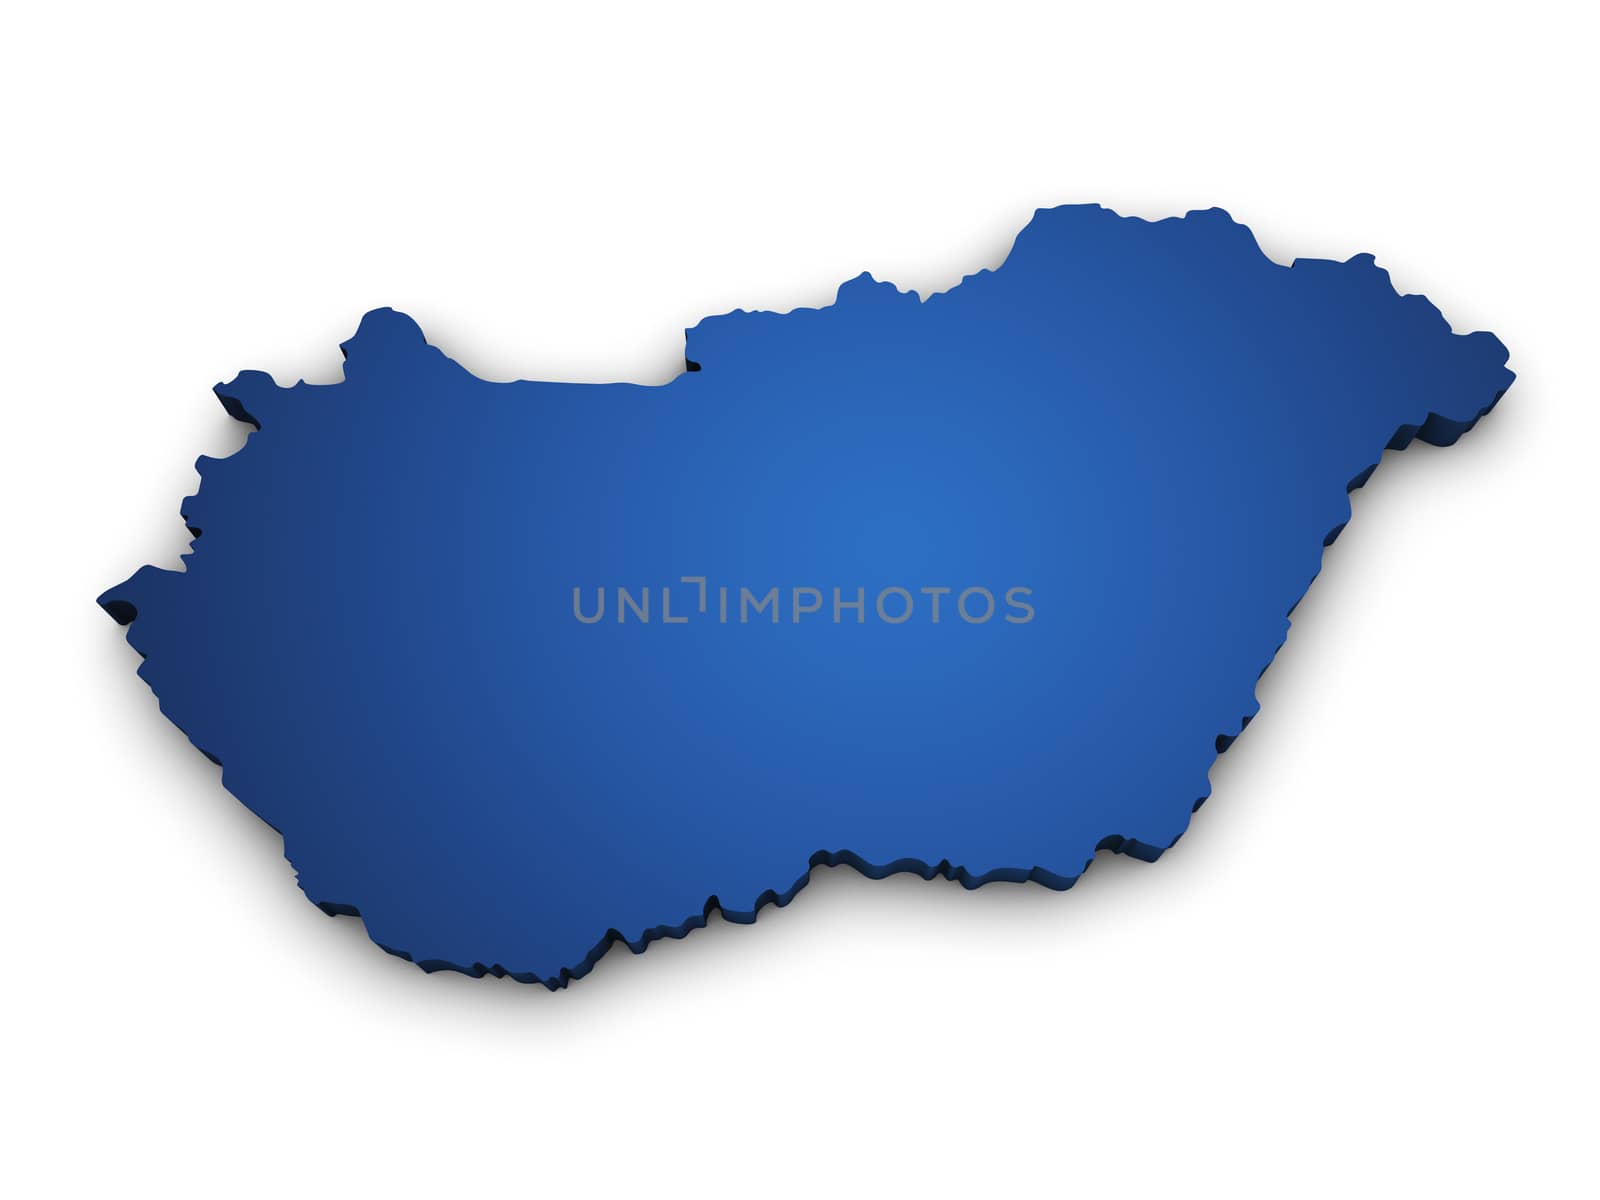 Shape 3d of Hungary map colored in blue and isolated on white background.